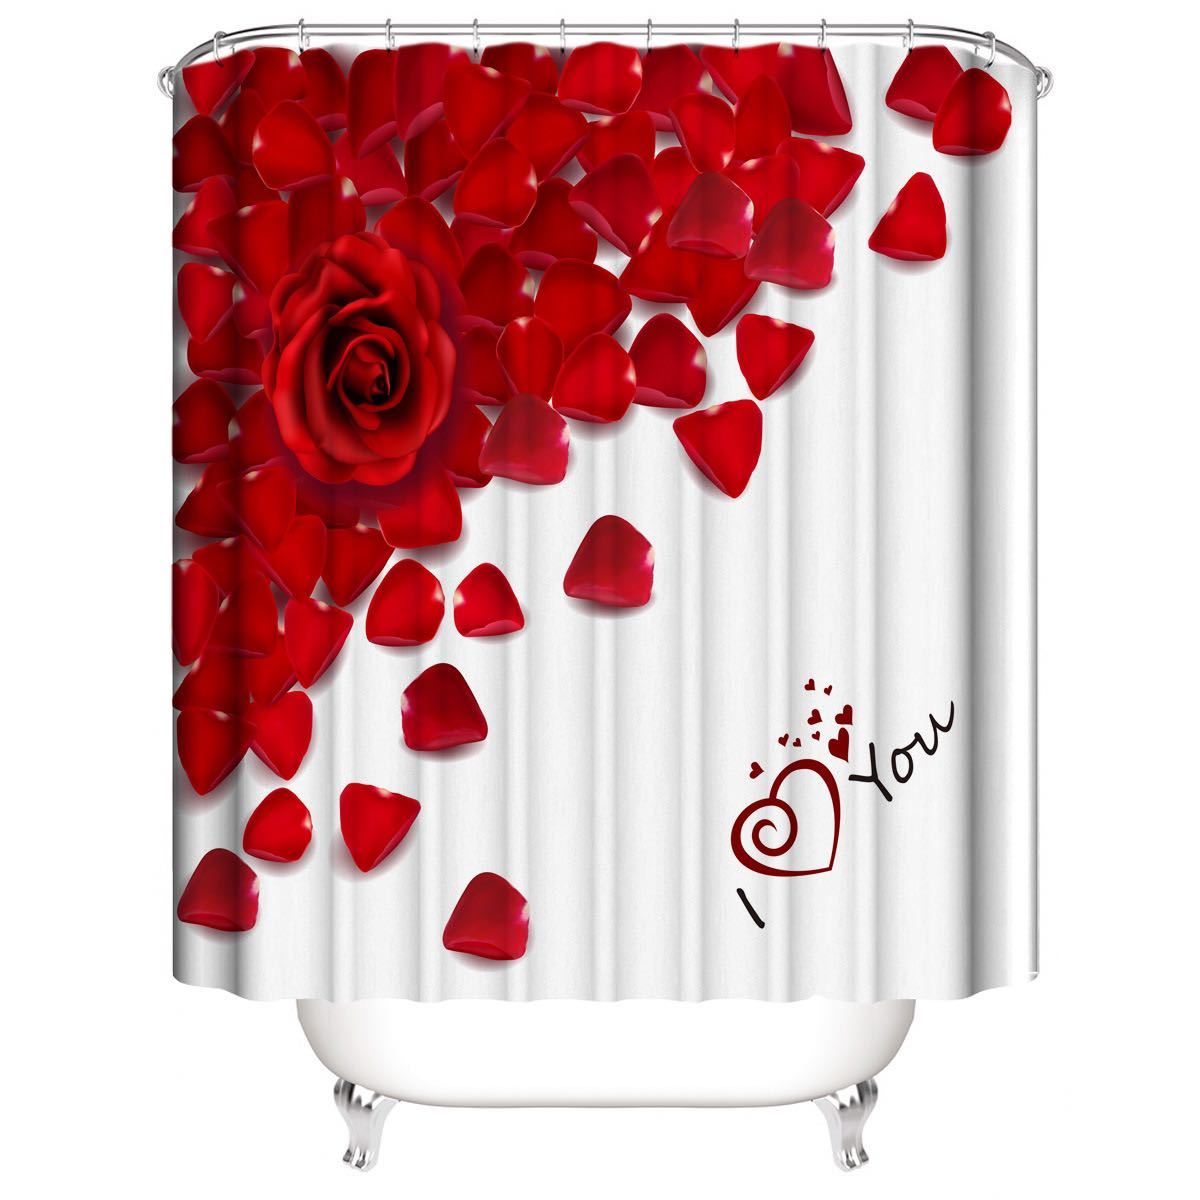  new goods shower curtain toilet cover bathroom mat rose rose red 4 point set mold proofing water-repellent atmosphere decoration light weight speed . bath supplies 